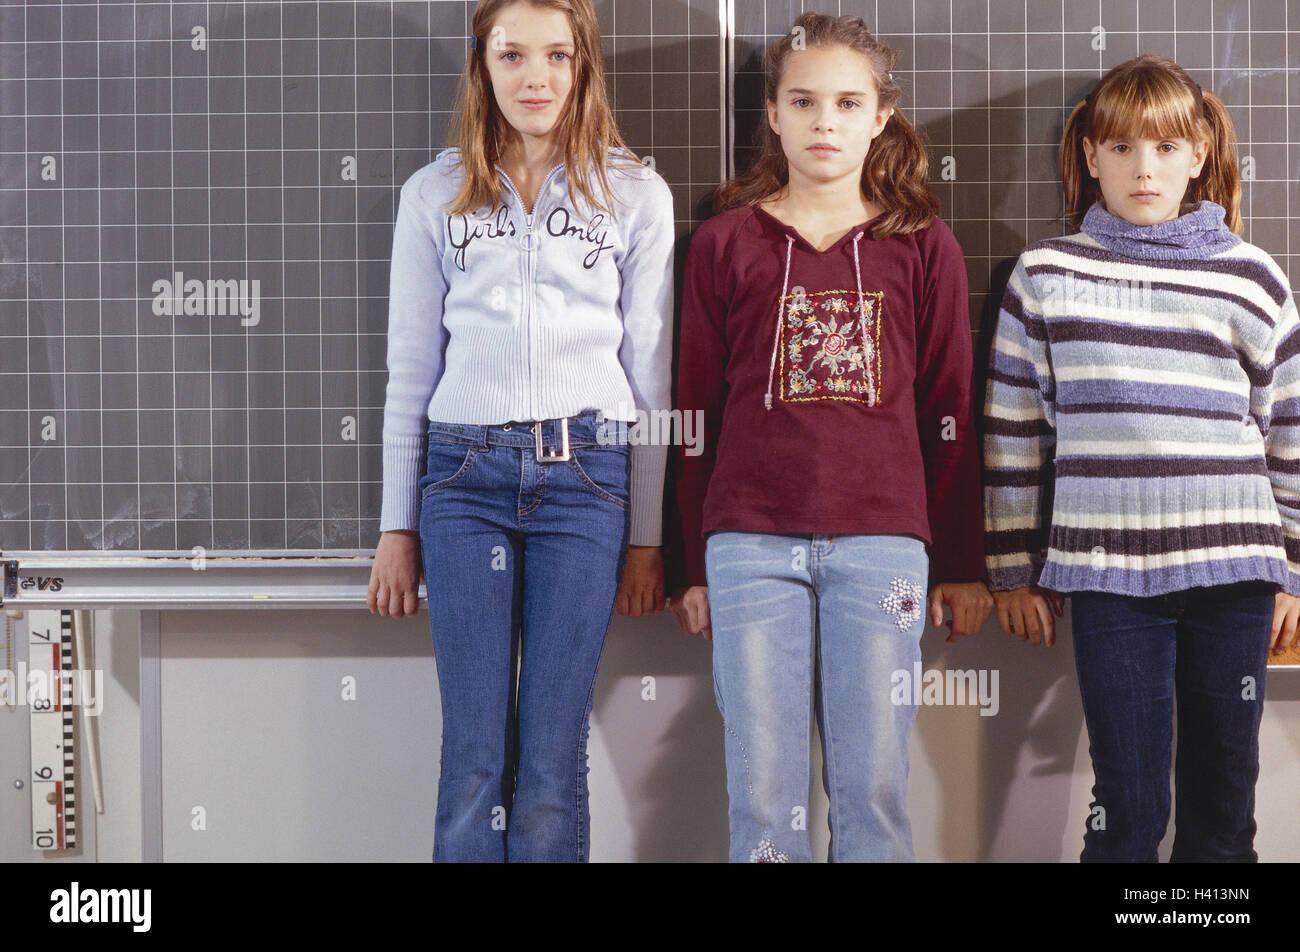 Classrooms, notice board, girl, stand school, class, class-mates, friends, 10 - 12 years, three, class community, common figureistic, cohesion, friendship, seriously Stock Photo